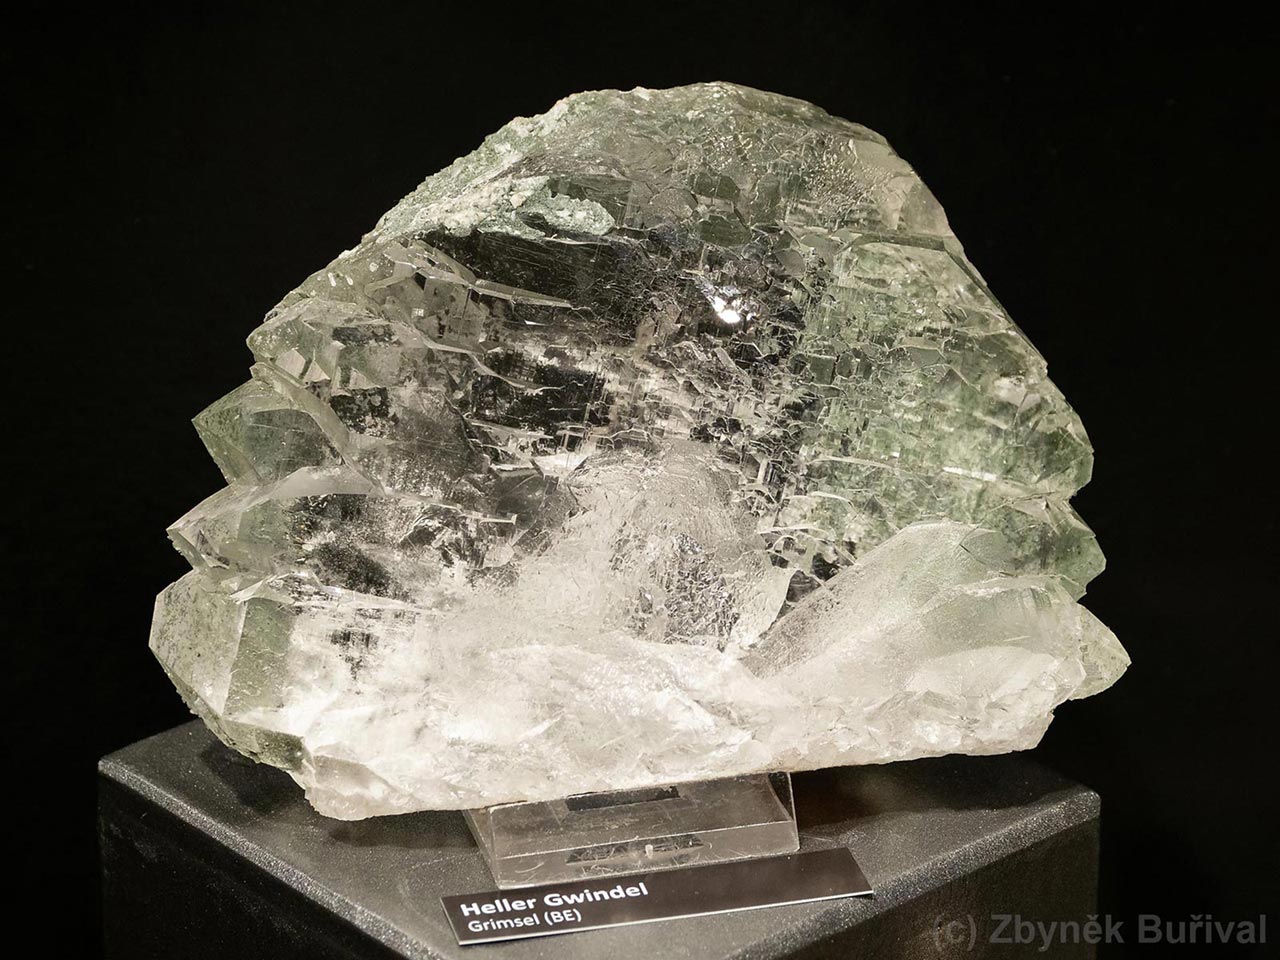 Clear quartz gwindel with minor chlorite from Grimsel Pass, Switzerland